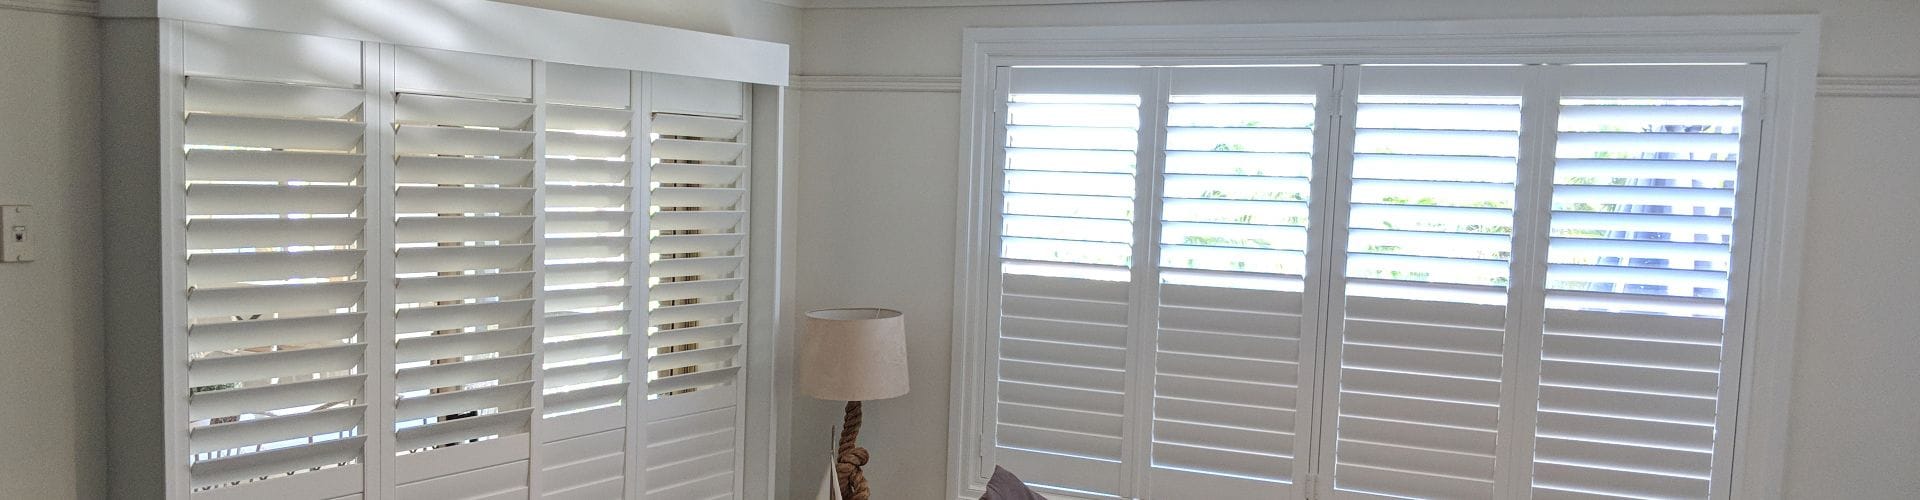 Gold Coast blinds, awnings and shutters